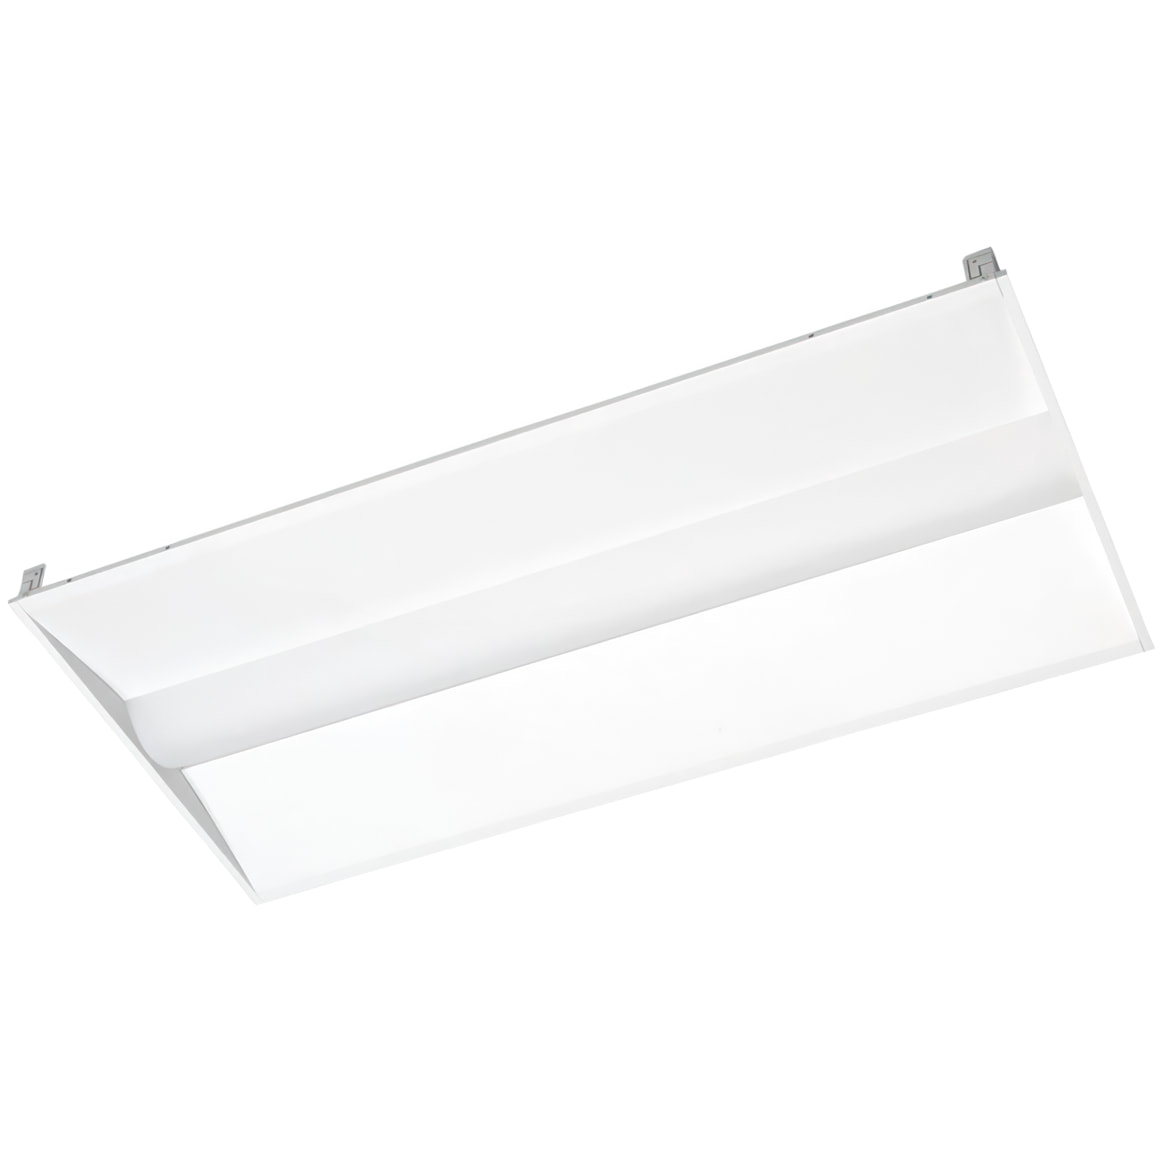 This 2x4 fixture has a rectangular shaped design and has integrated LEDs.